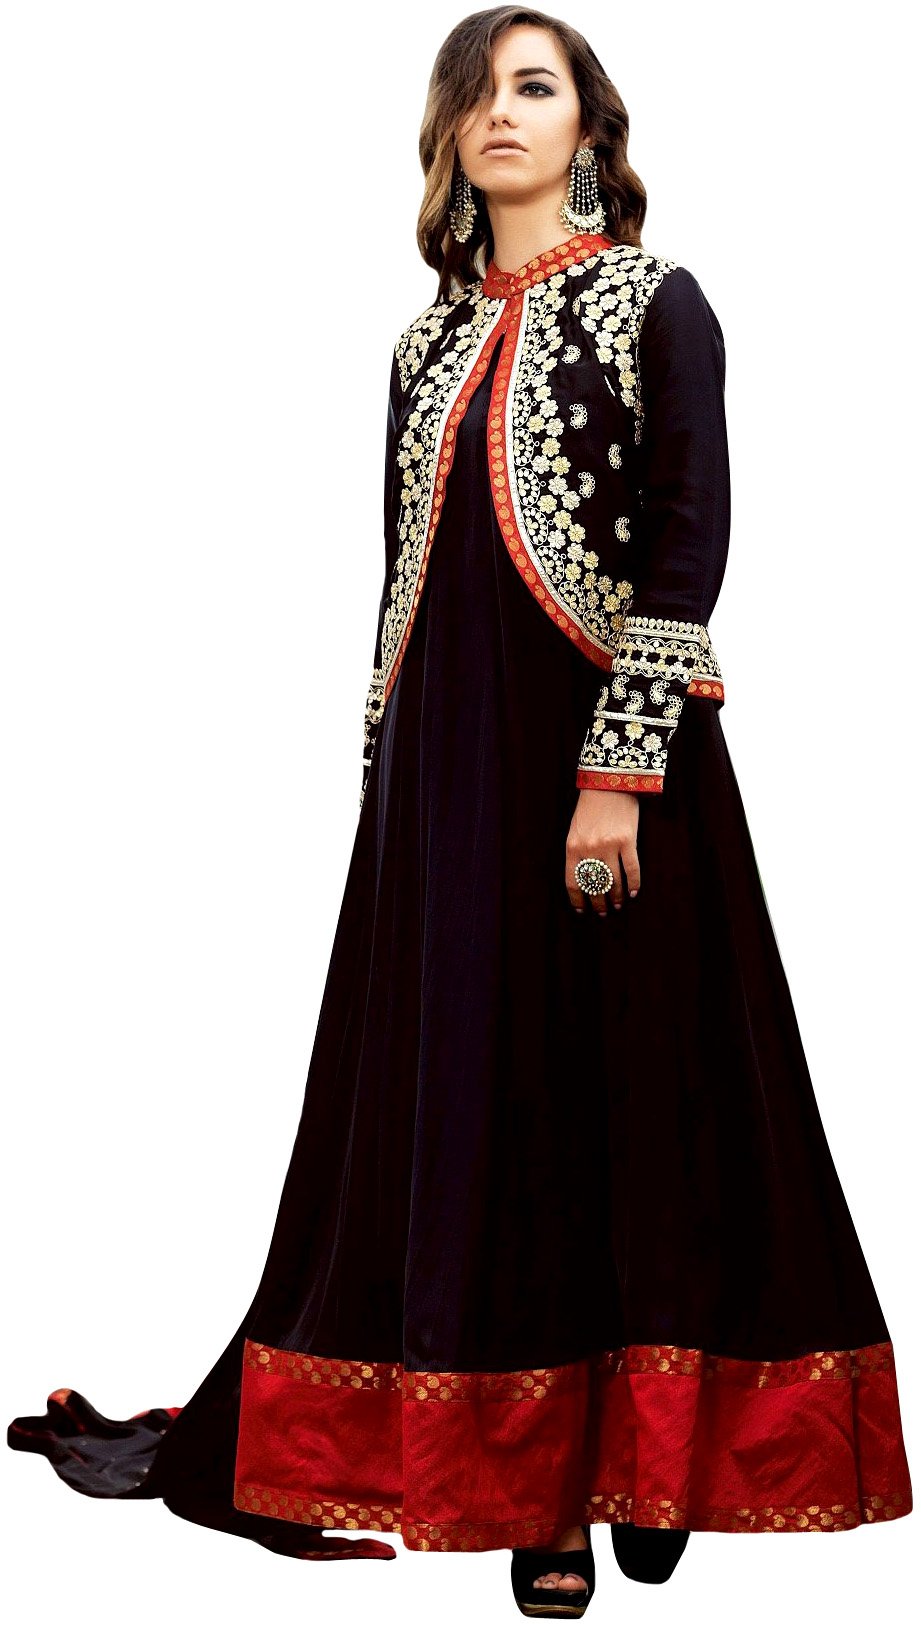 Mauve net and satin silk jacket style gown anarkali suit 3077